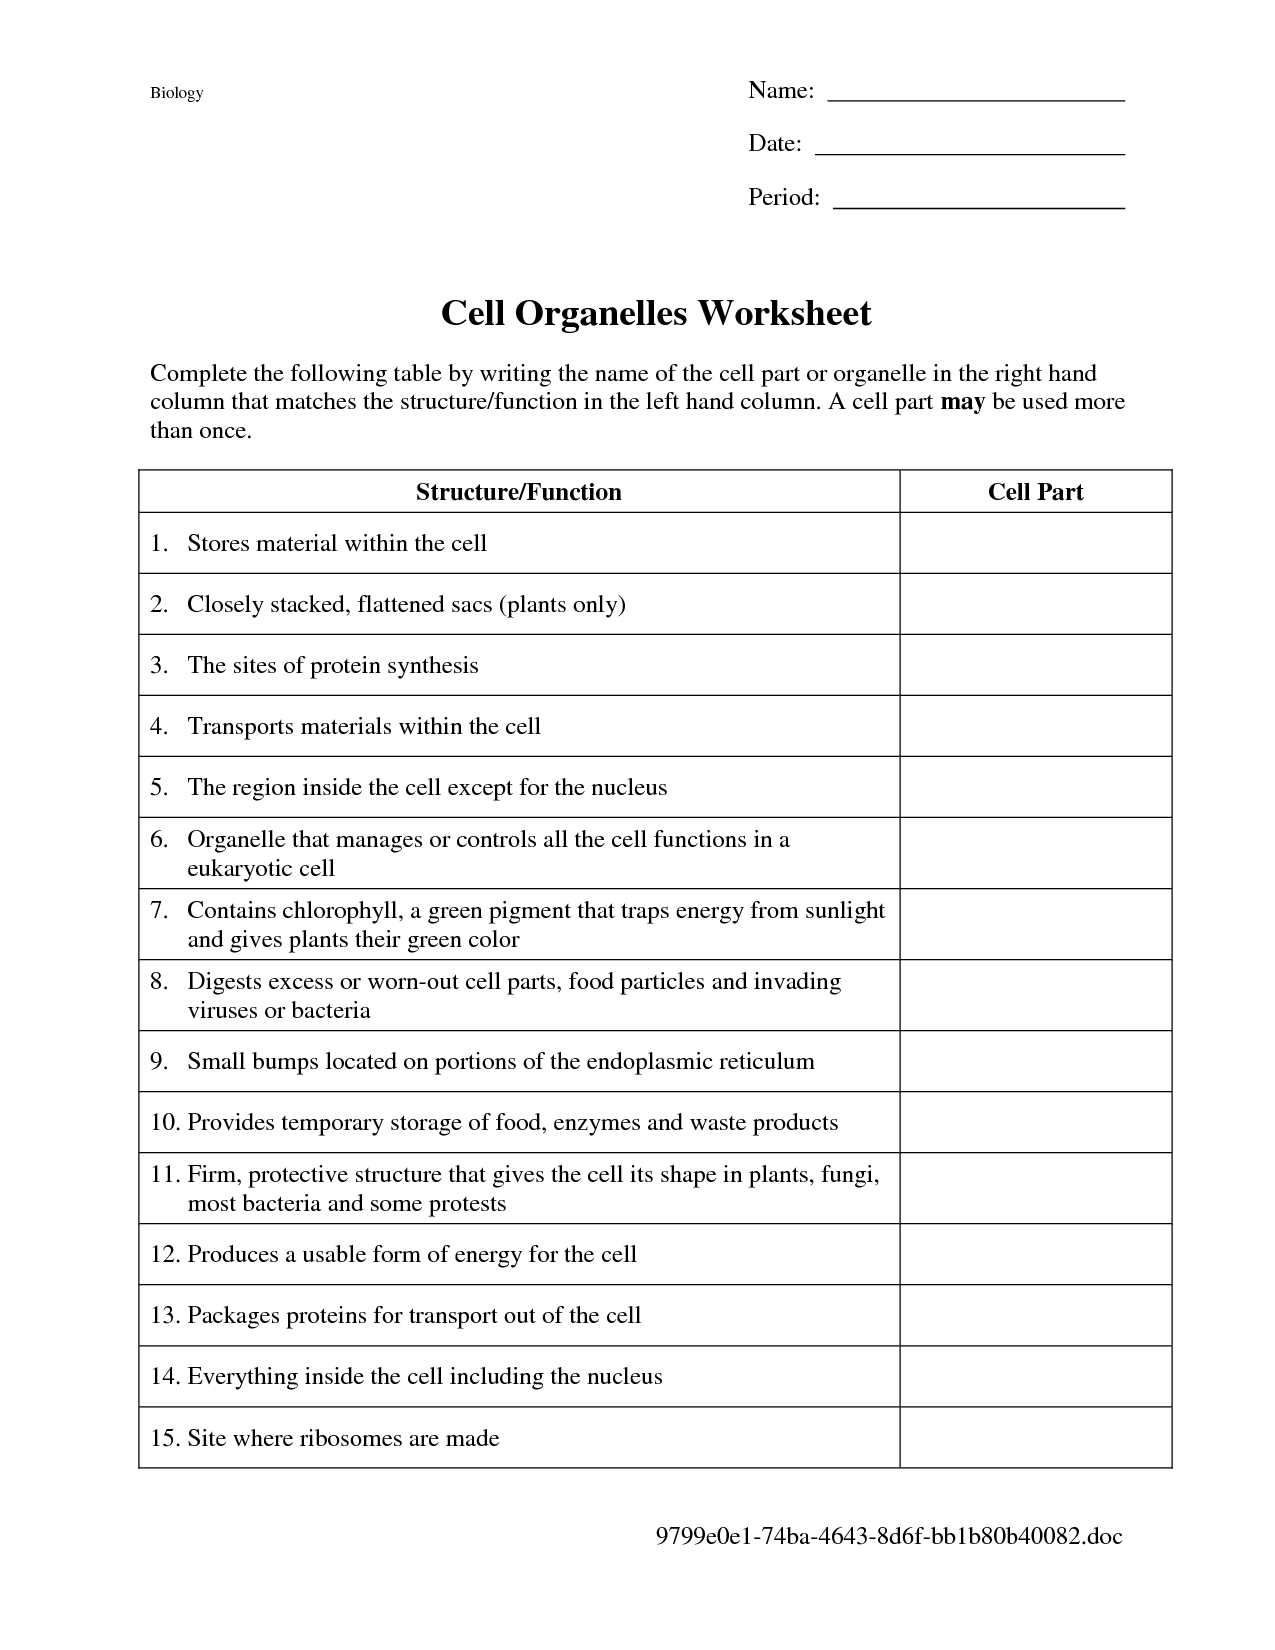 Energy Transformation Worksheet Middle School as Well as Cell Membrane Worksheet Google Search